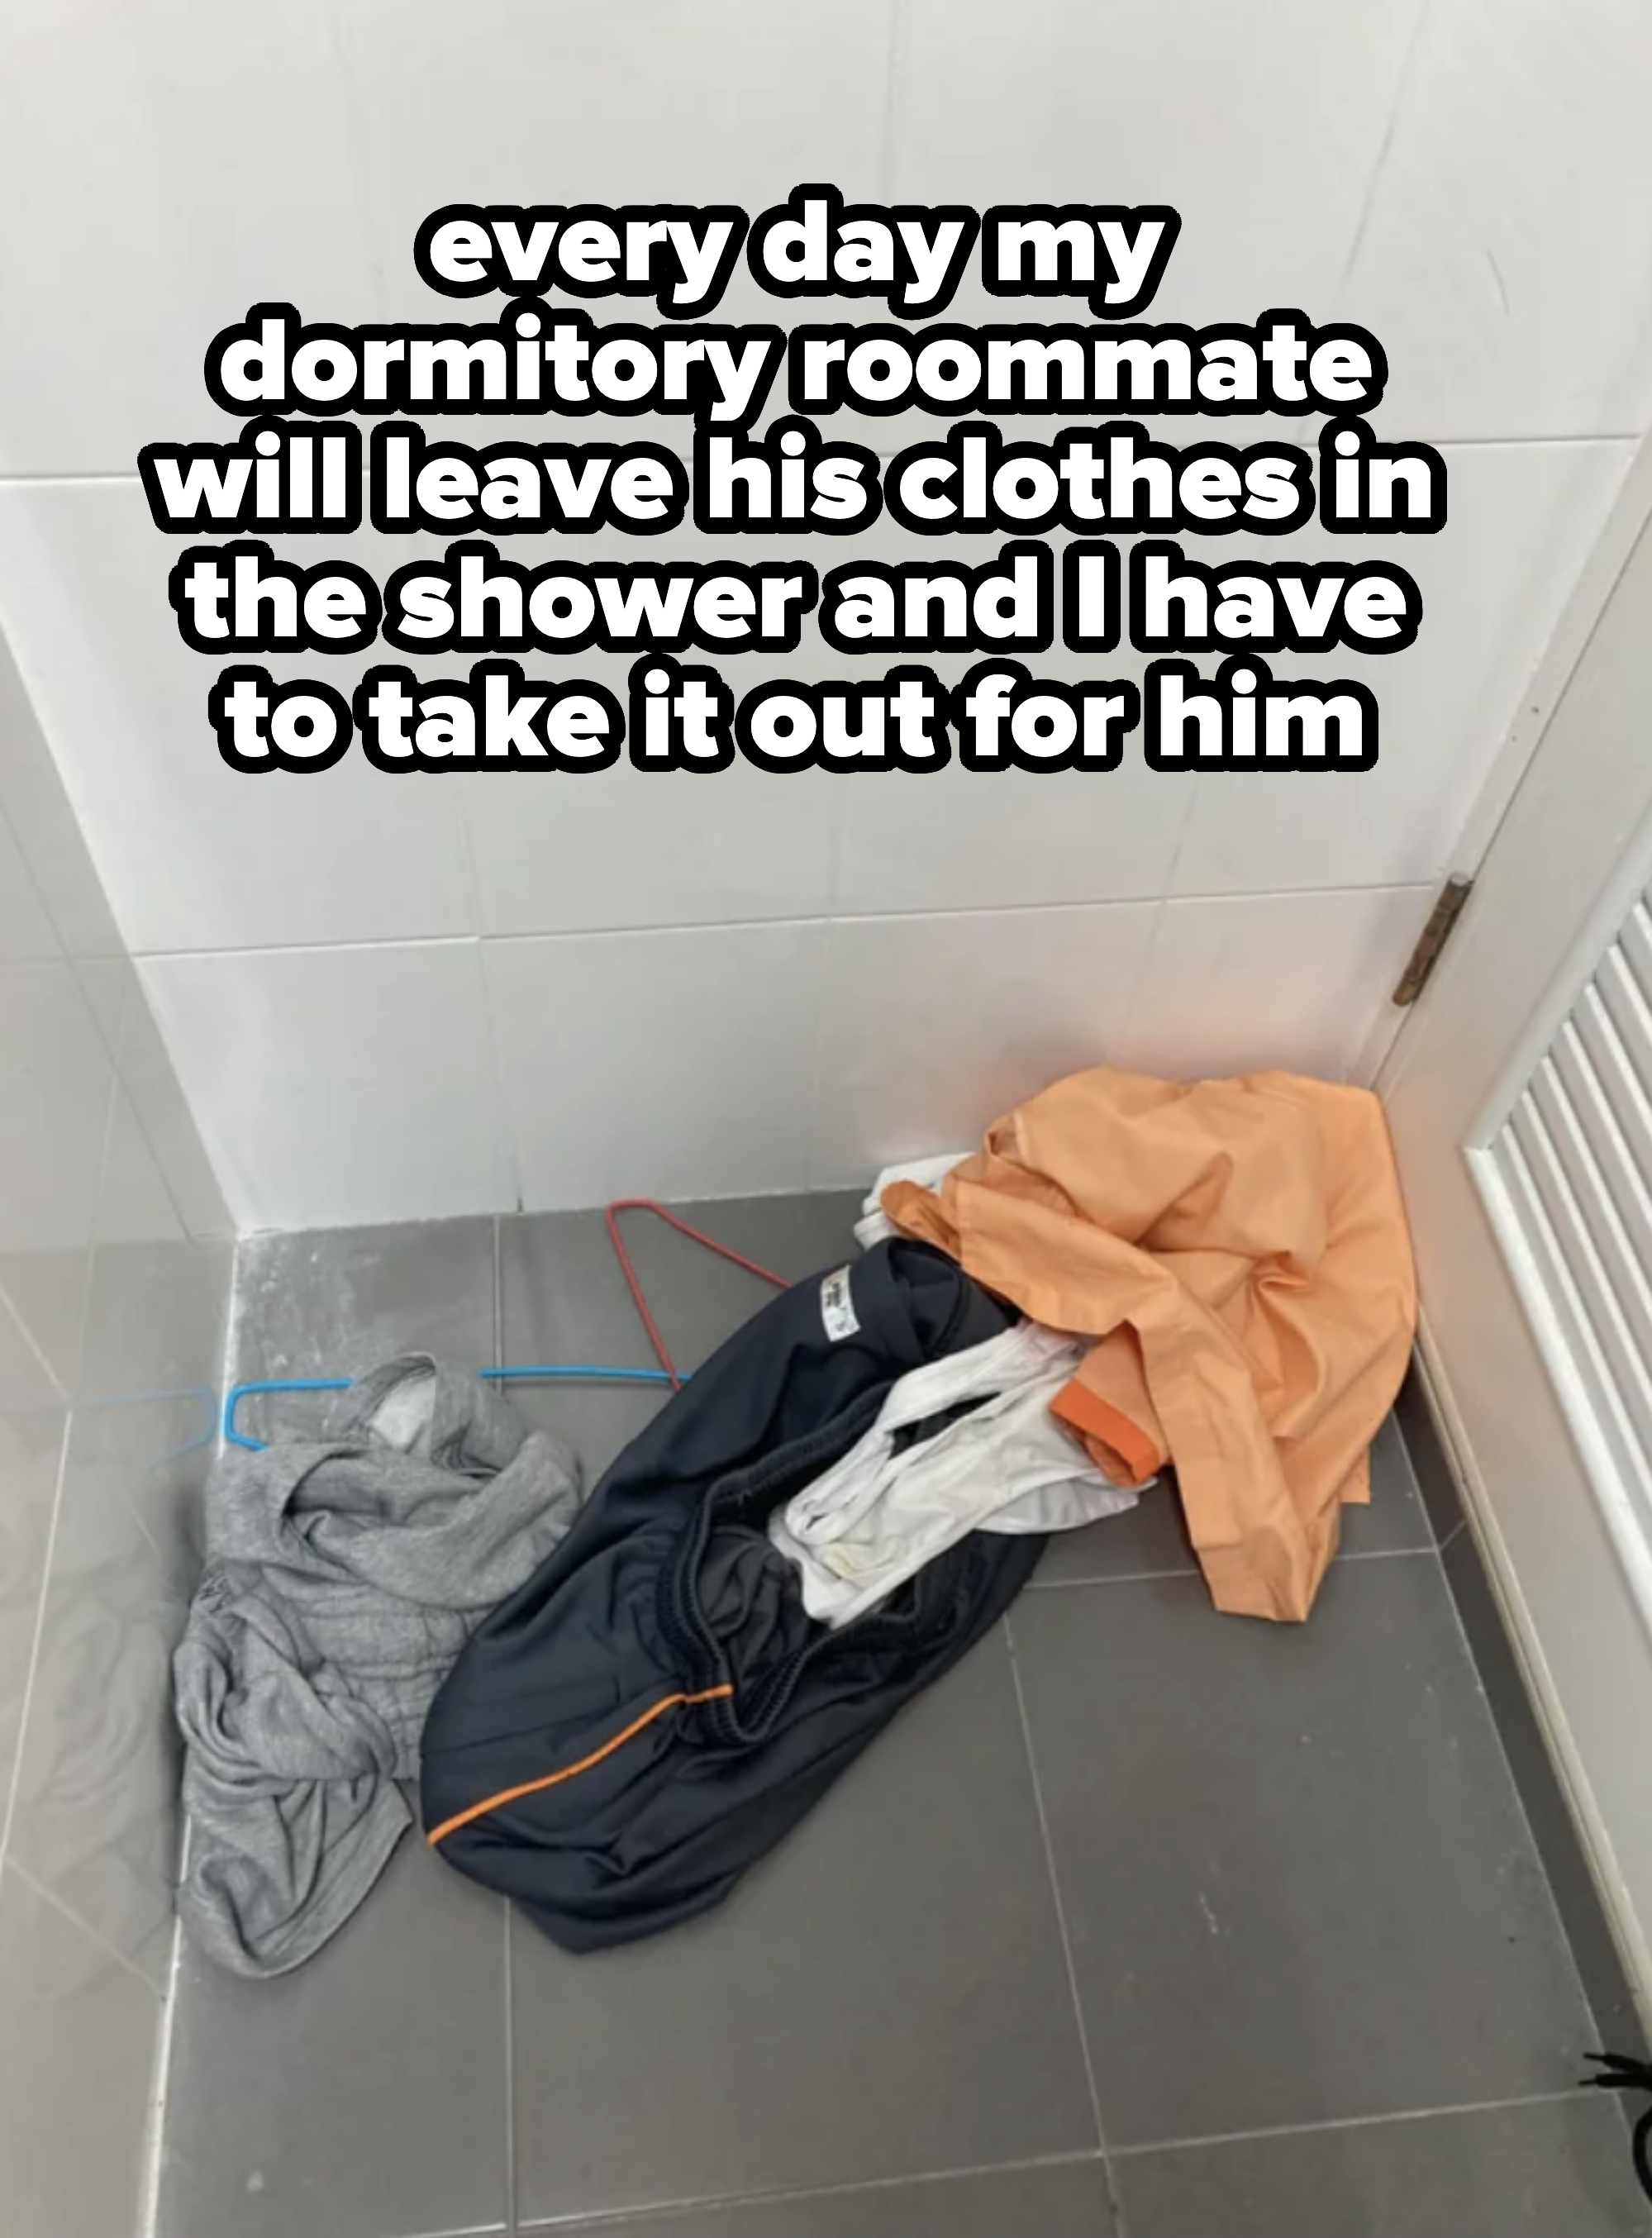 clothes left in the shower